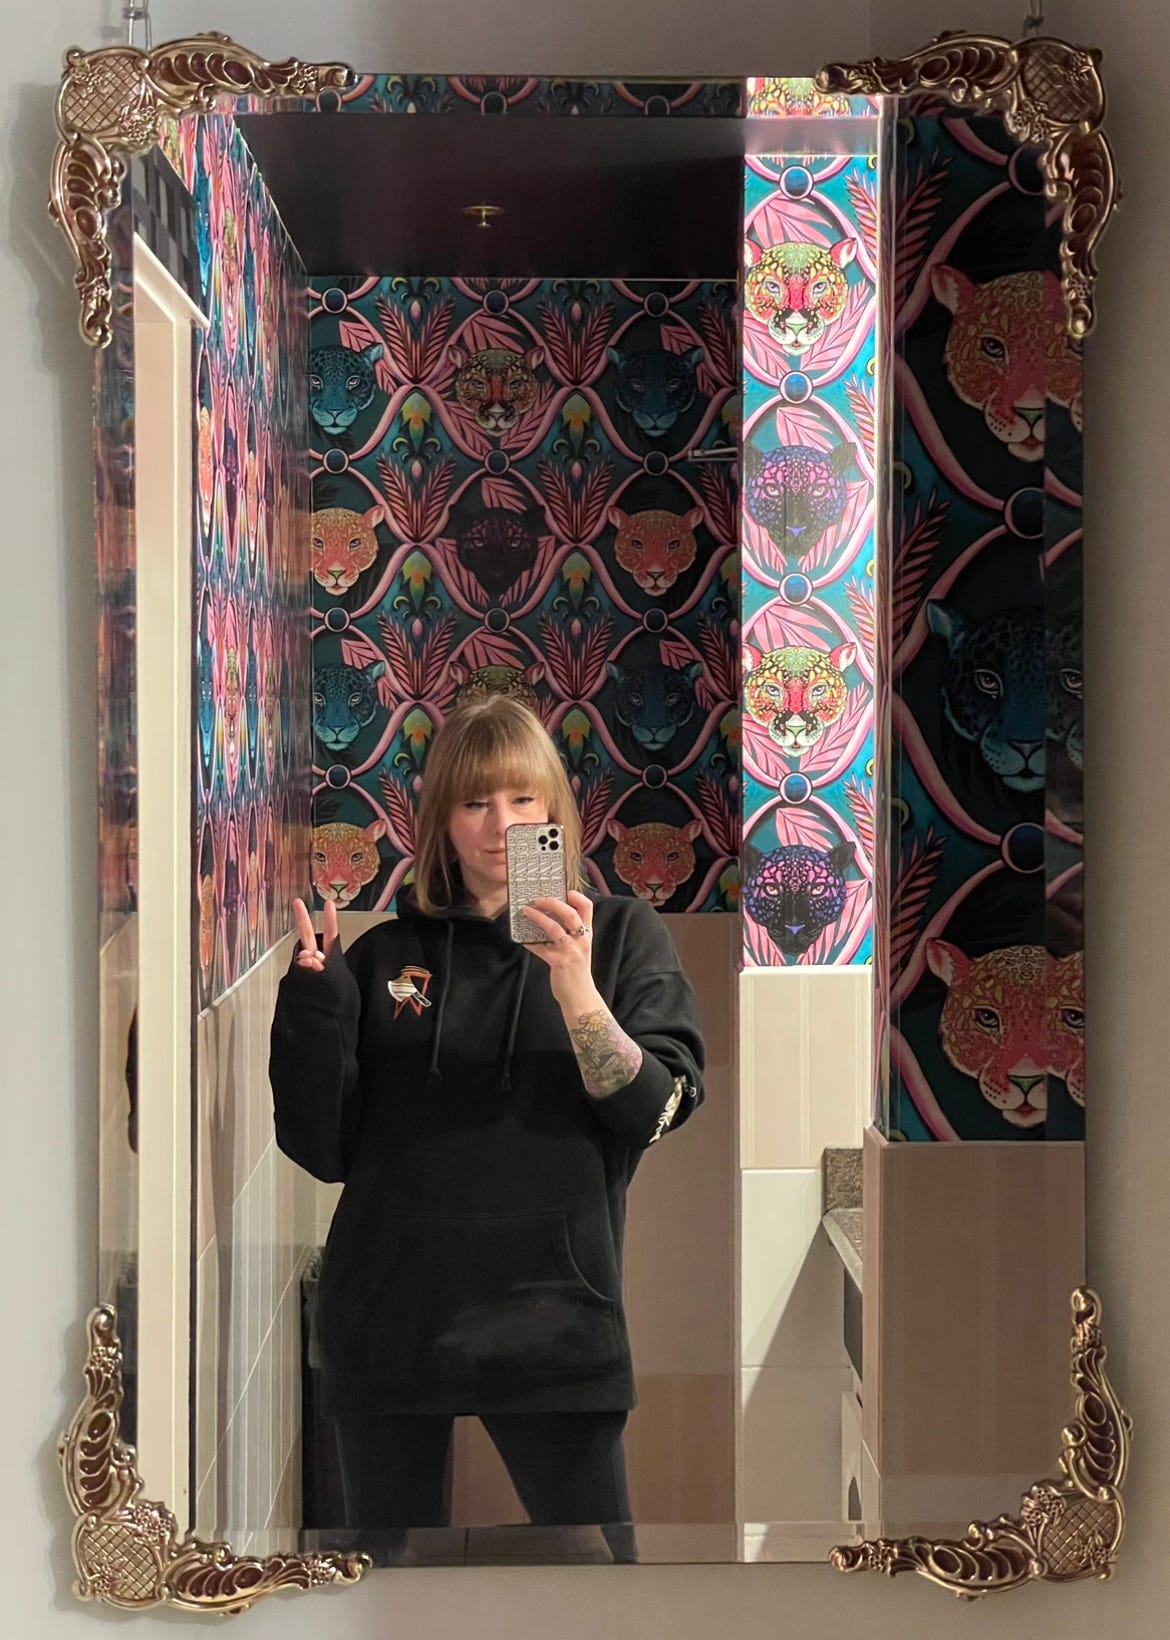 Image shows a blonde white woman wearing black clothes taking a picture of herself in an ornate mirror. Behind her is vibrant wallpaper with a design of jaguar faces.